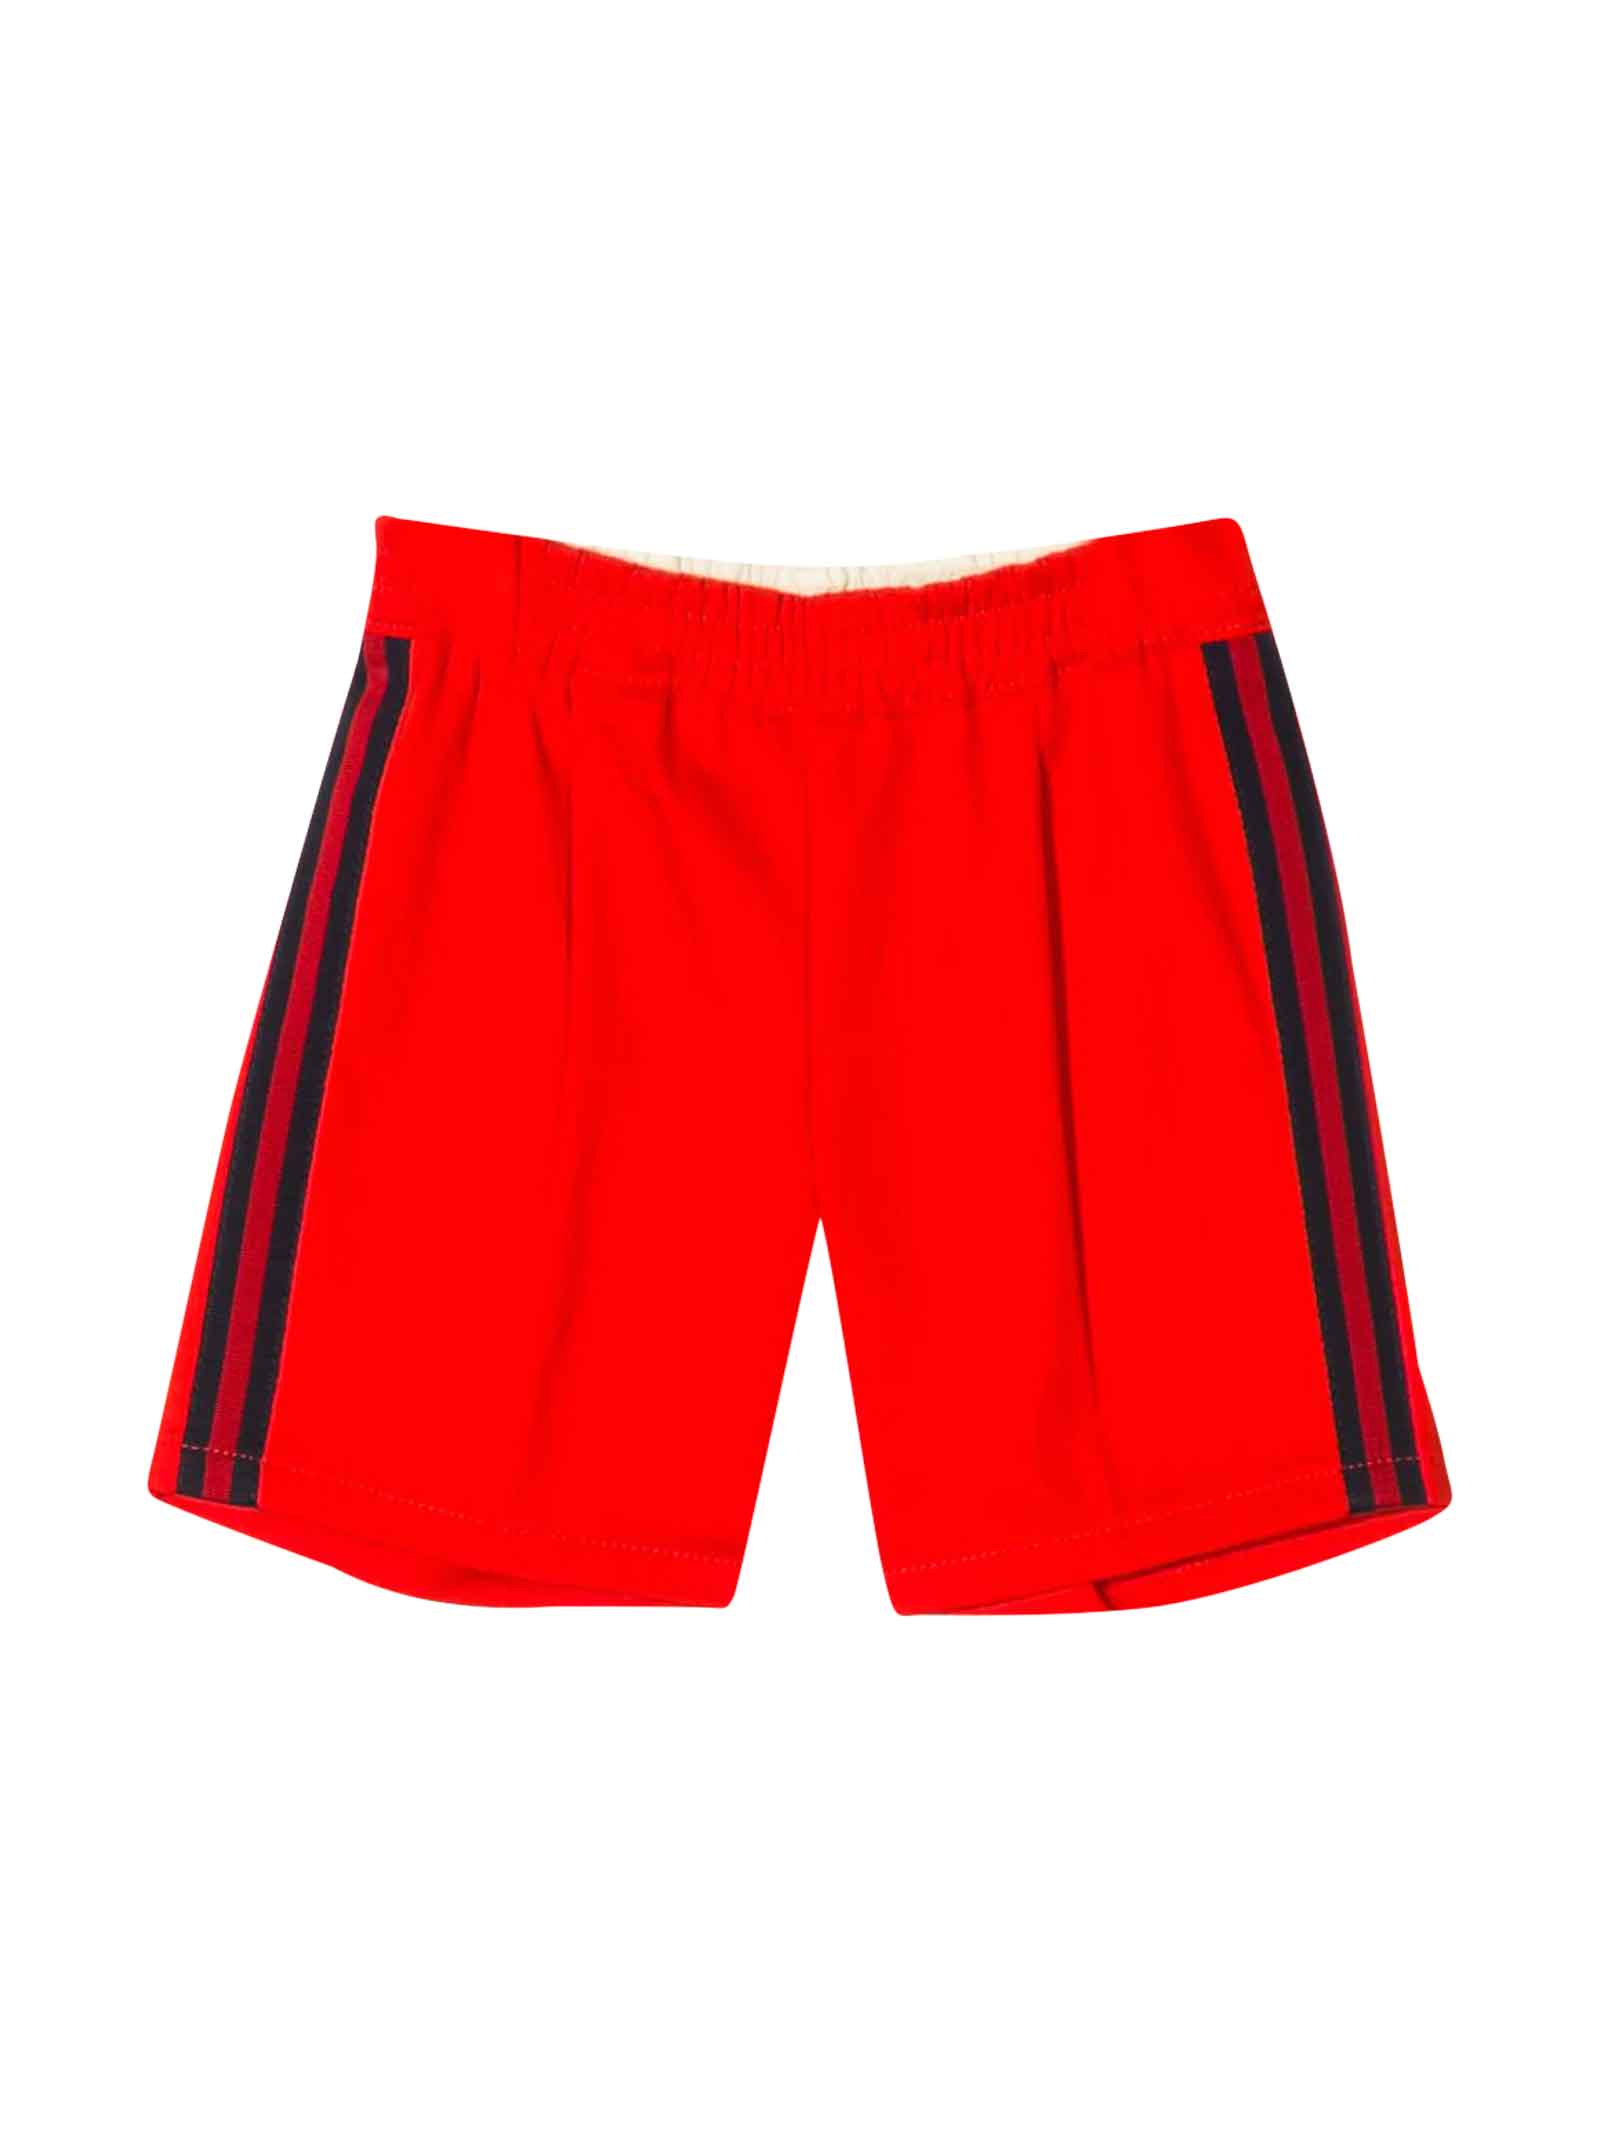 GUCCI RED SPORT SHORTS WITH SIDE BANDS,600271XWAIW 6007